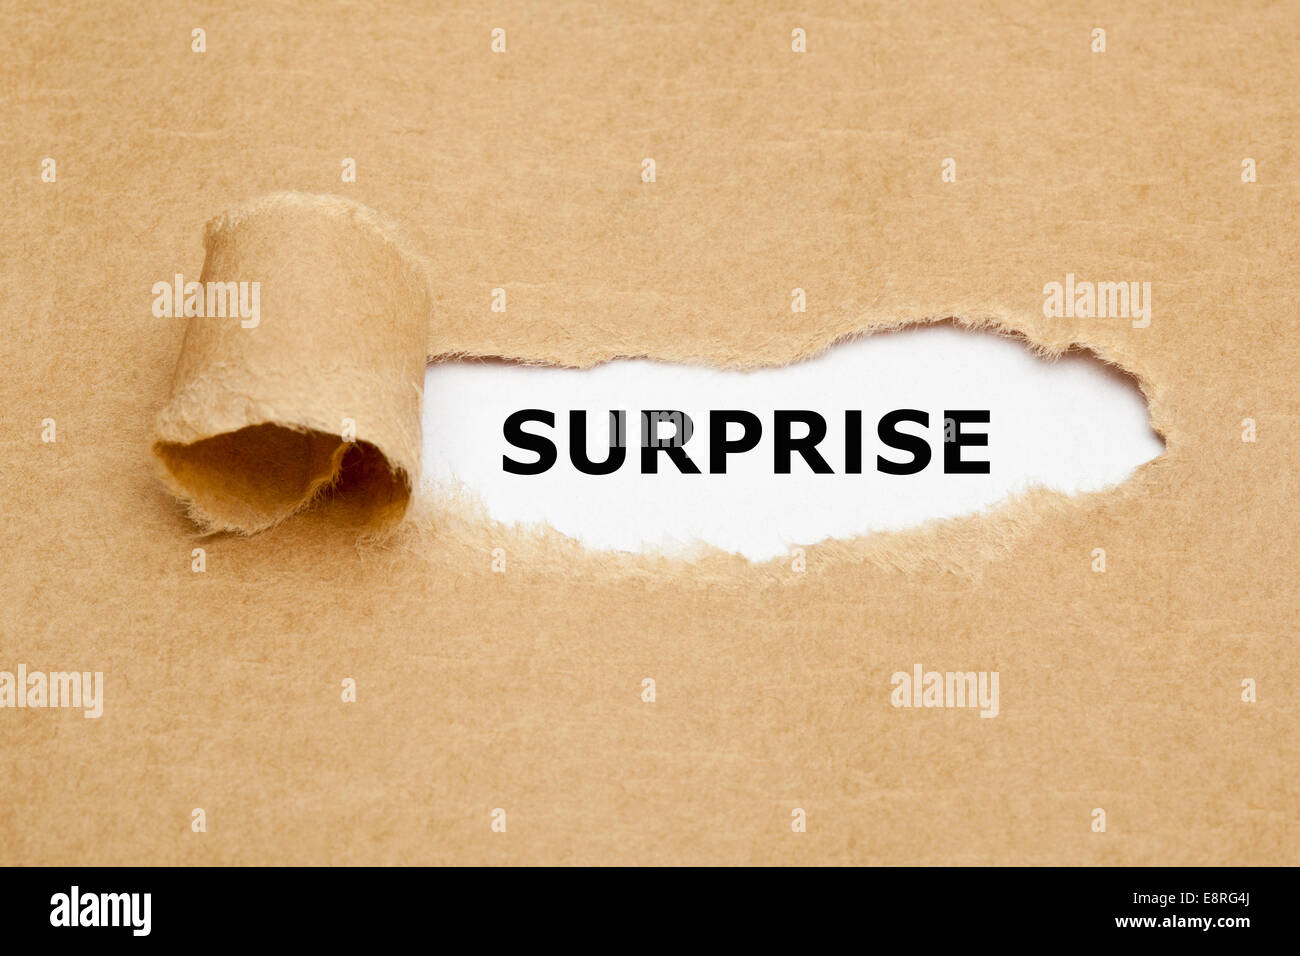 The word Surprise appearing behind torn brown paper. Stock Photo